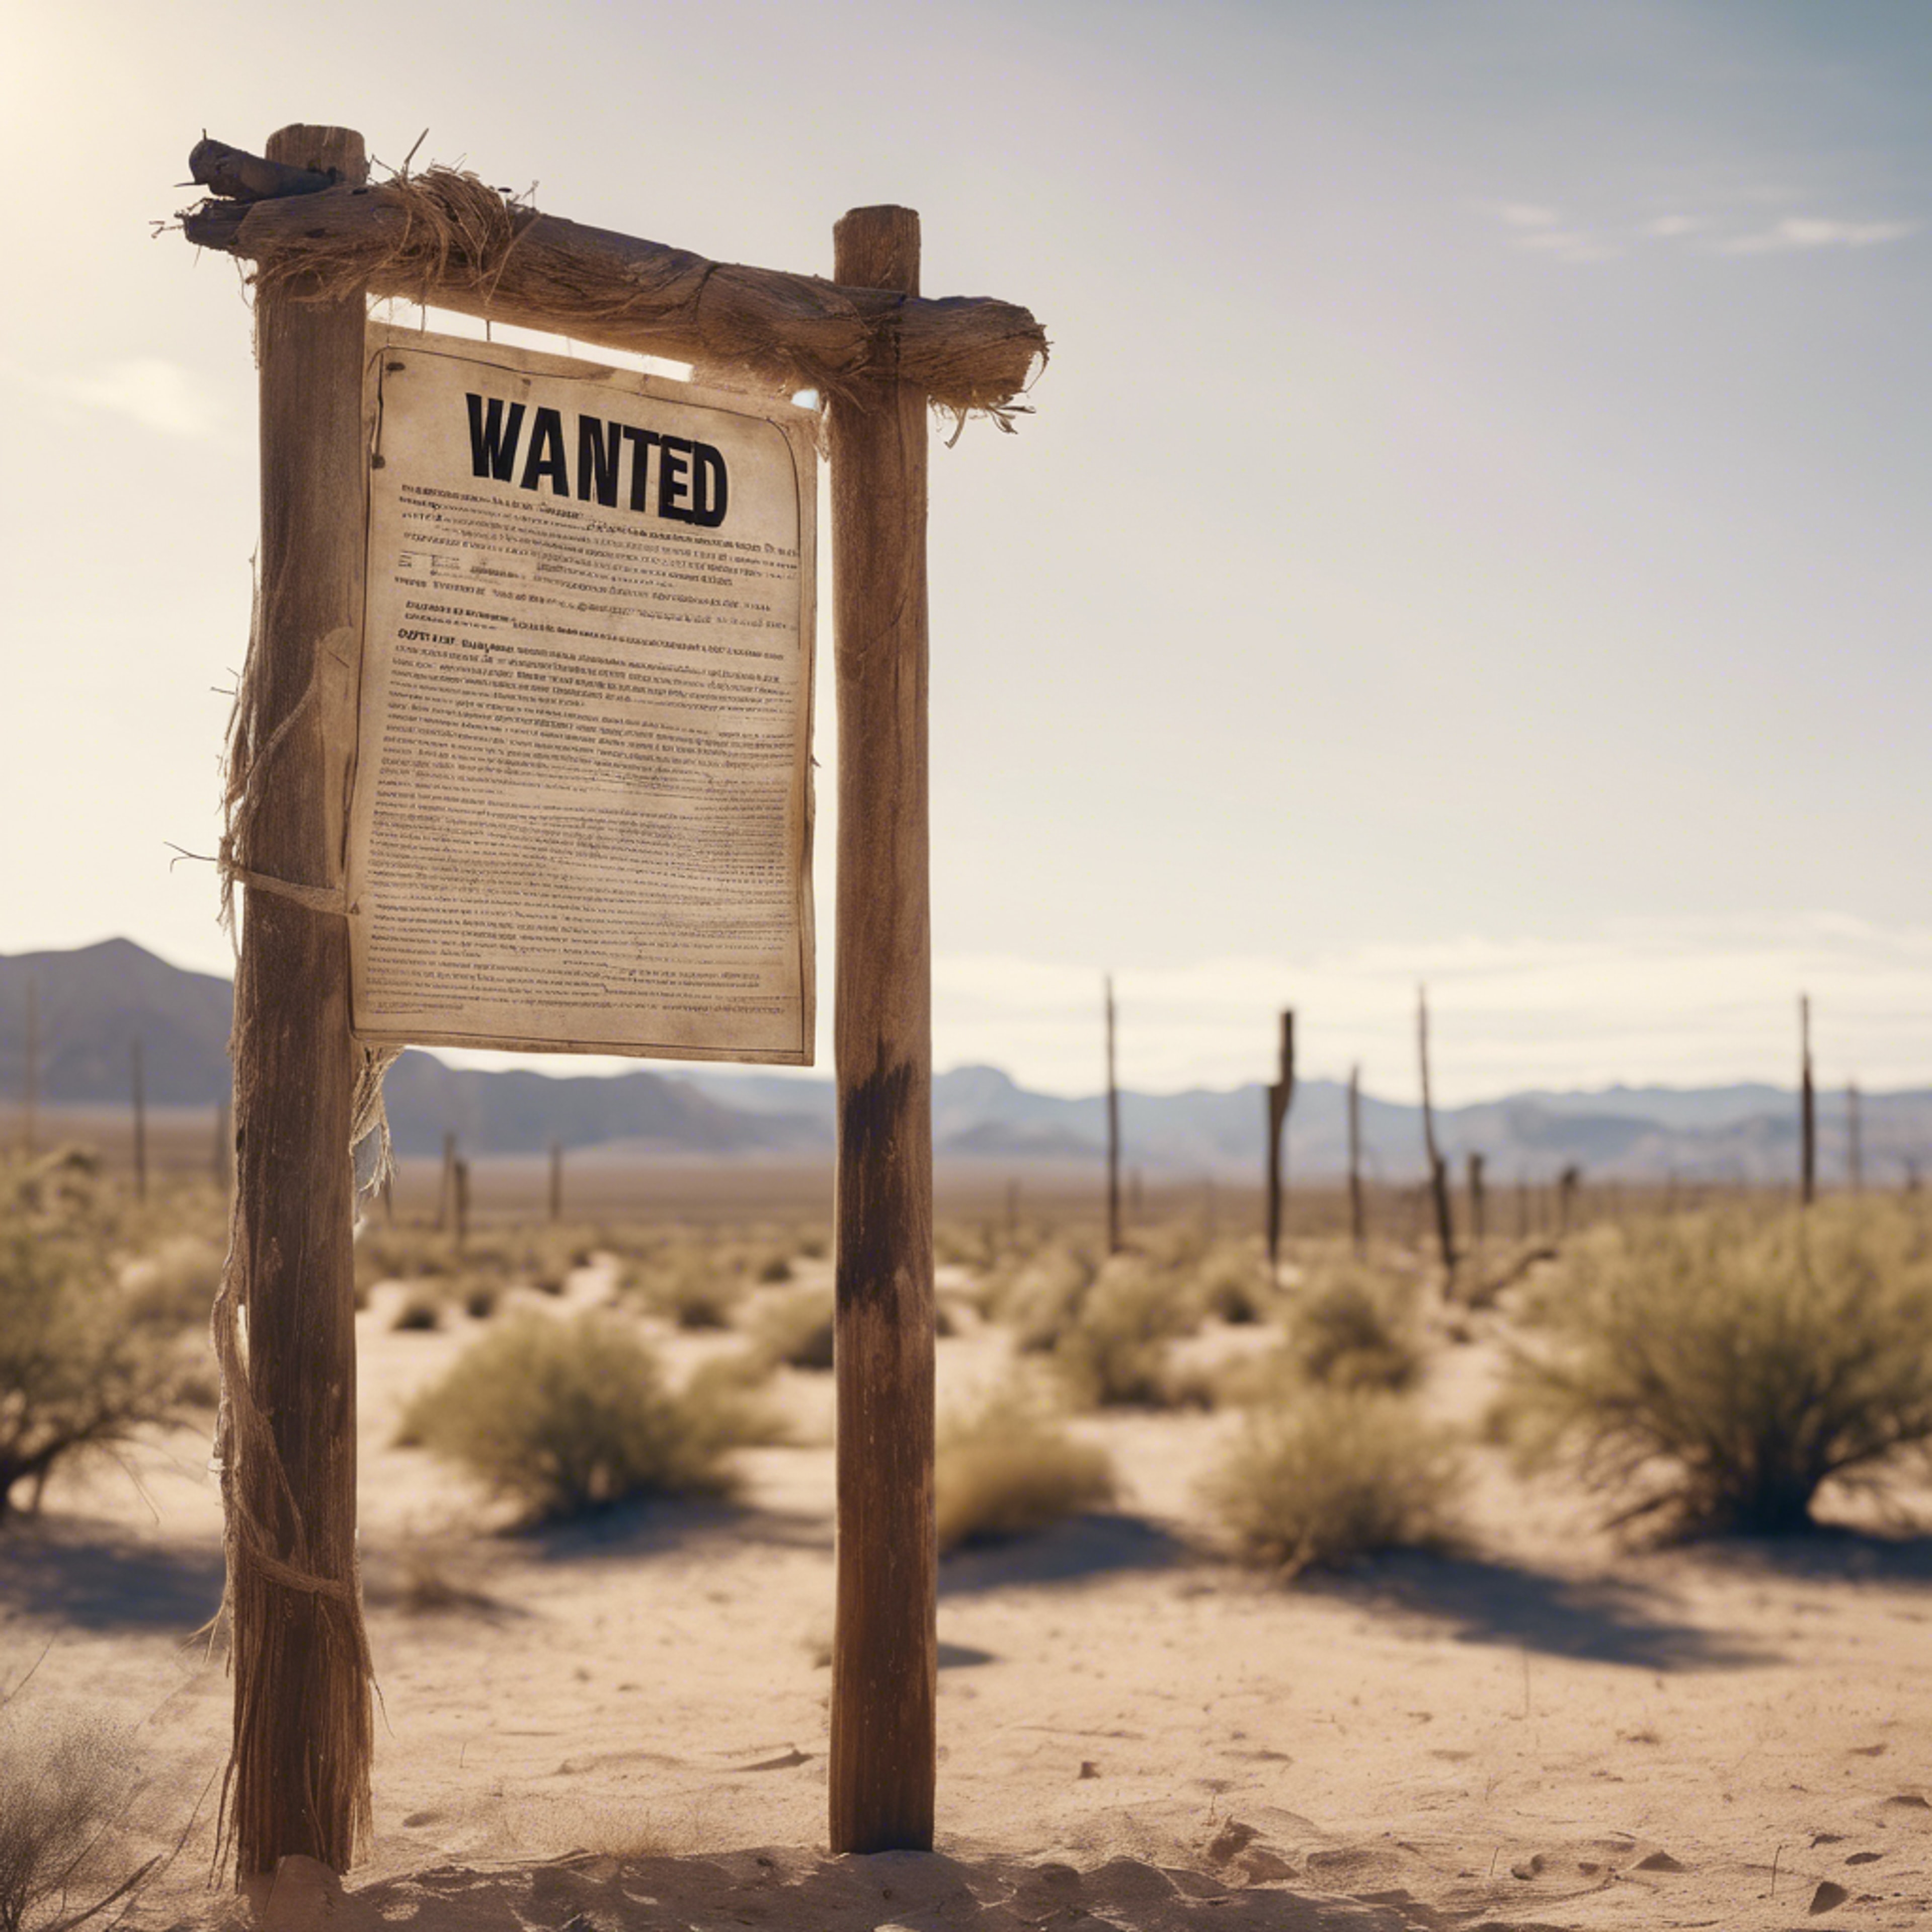 A wanted poster nailed to wooden post in a windy desert town, offering a reward in bold letters.壁紙[1e032392f4784d5094da]